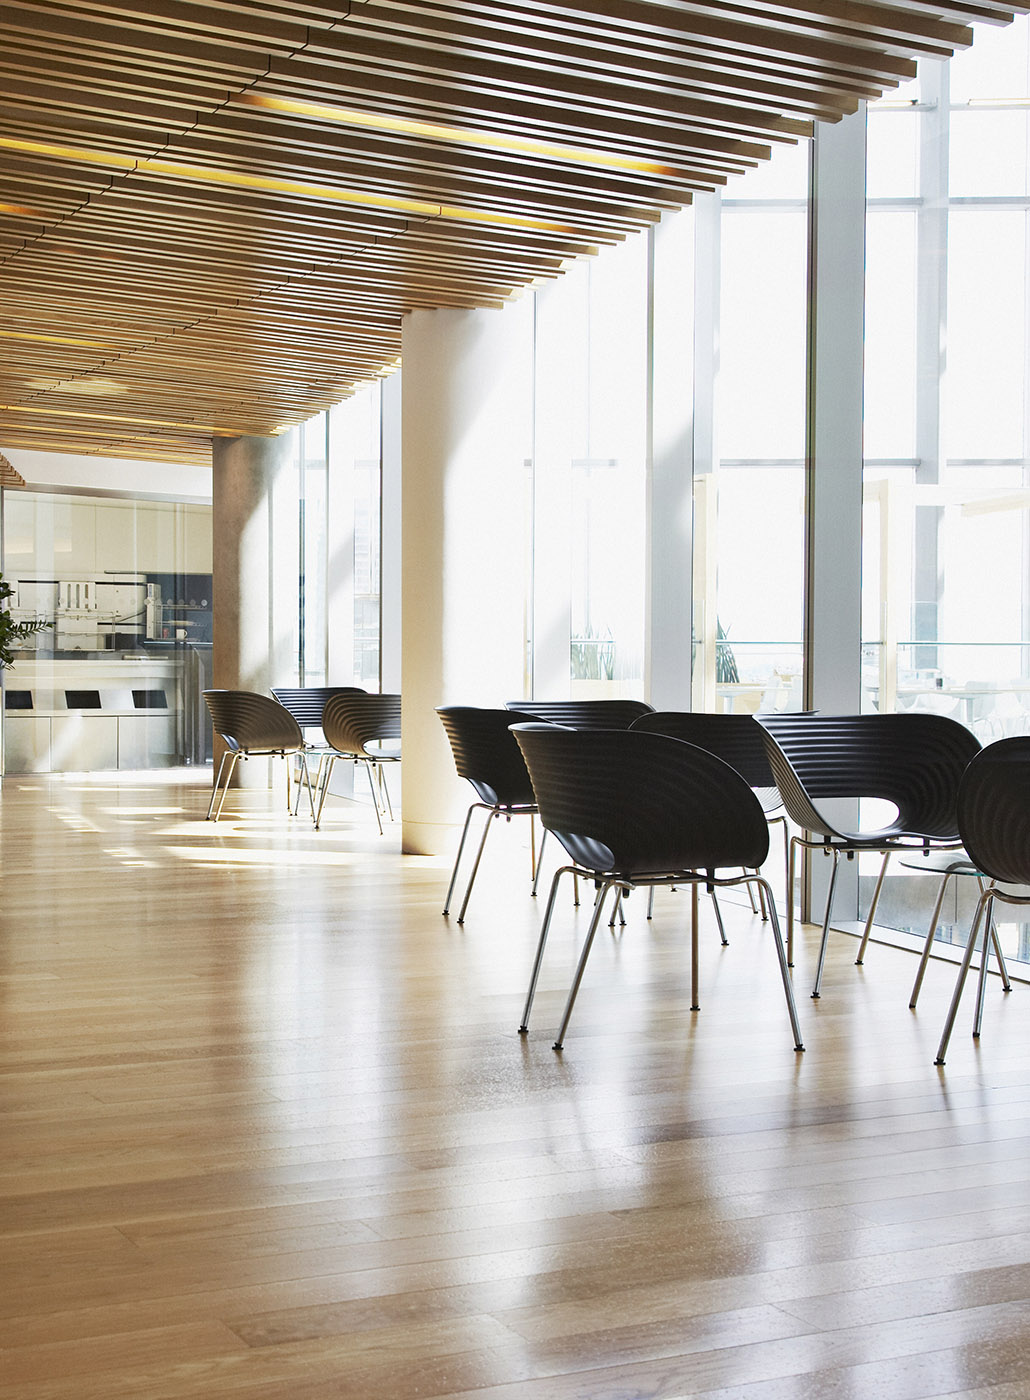 Chairs arranged on a hardwood floor in a well-lit modern office corridor.